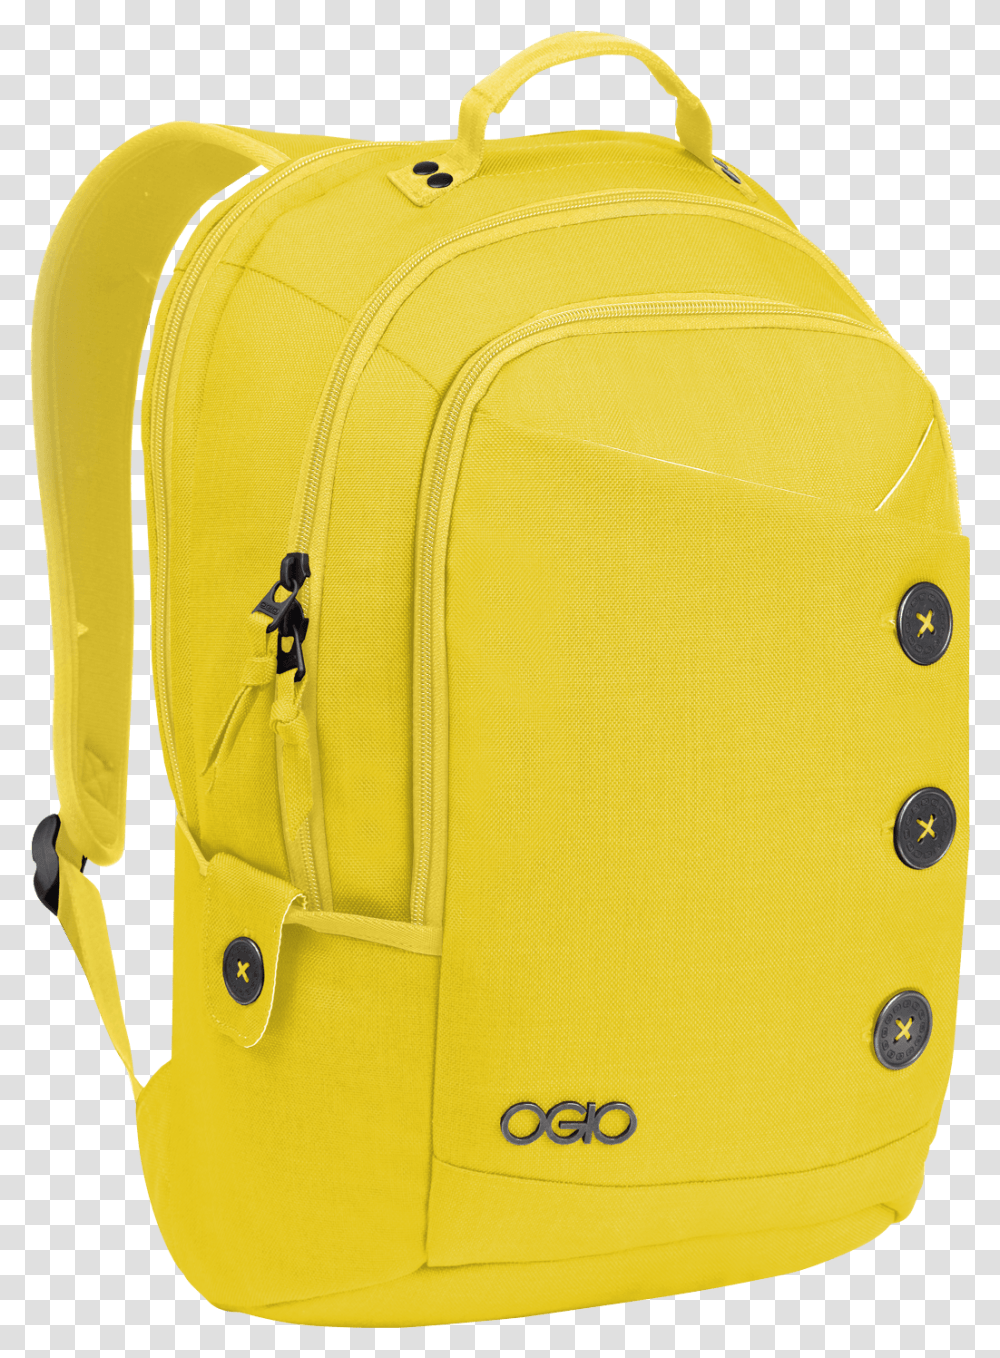 Ogio Yellow Backpack Yellow Backpack, Bag Transparent Png